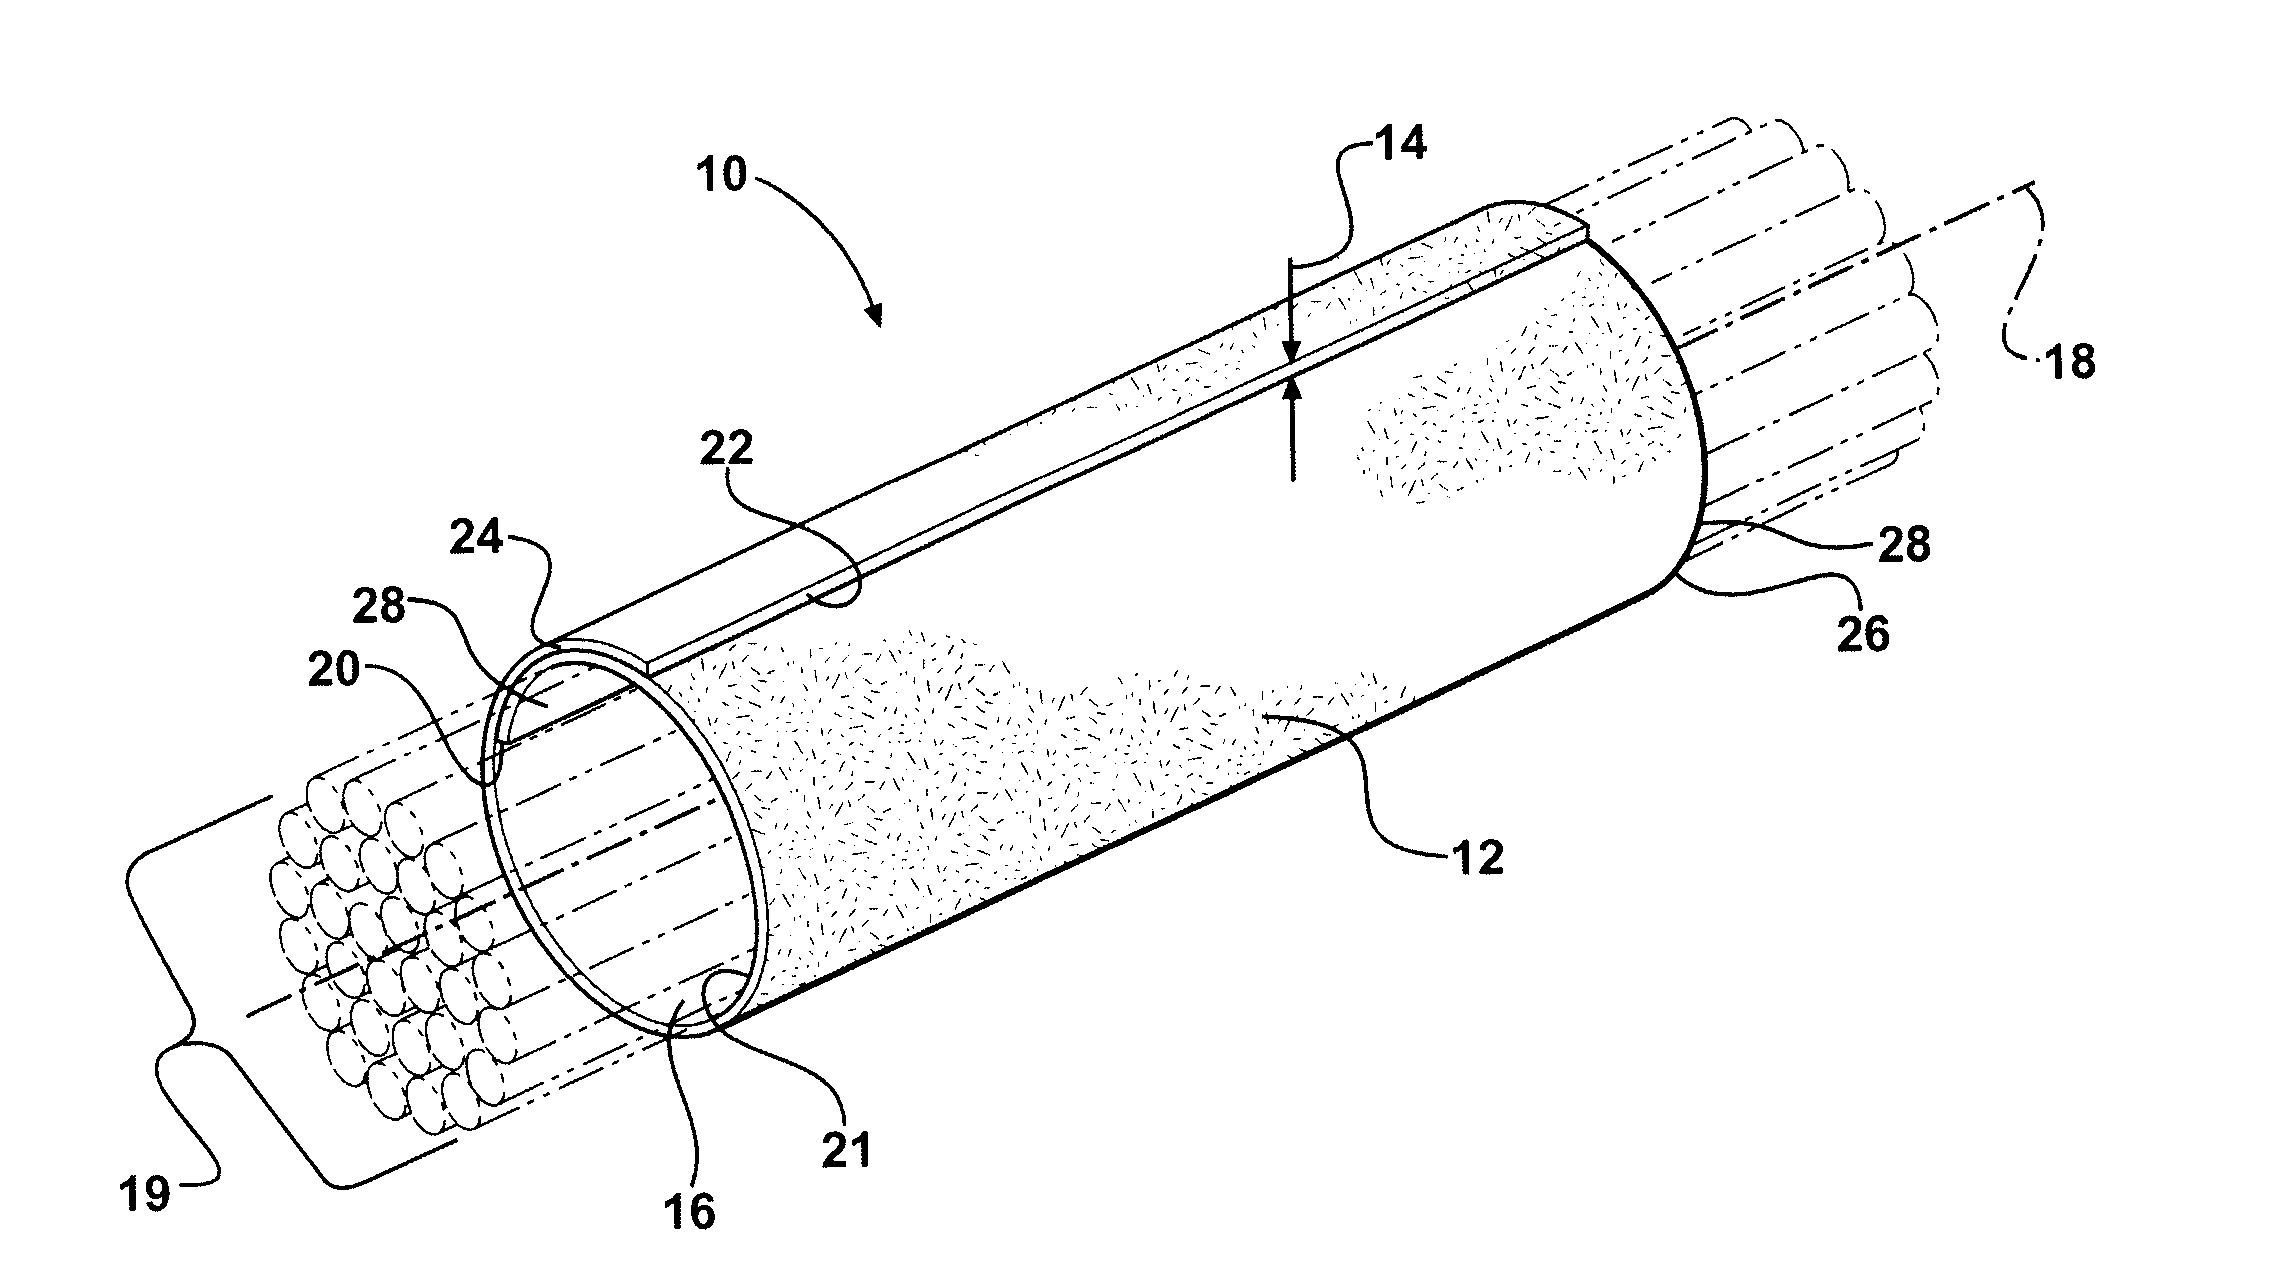 Non-woven self-wrapping acoustic sleeve and method of construction thereof